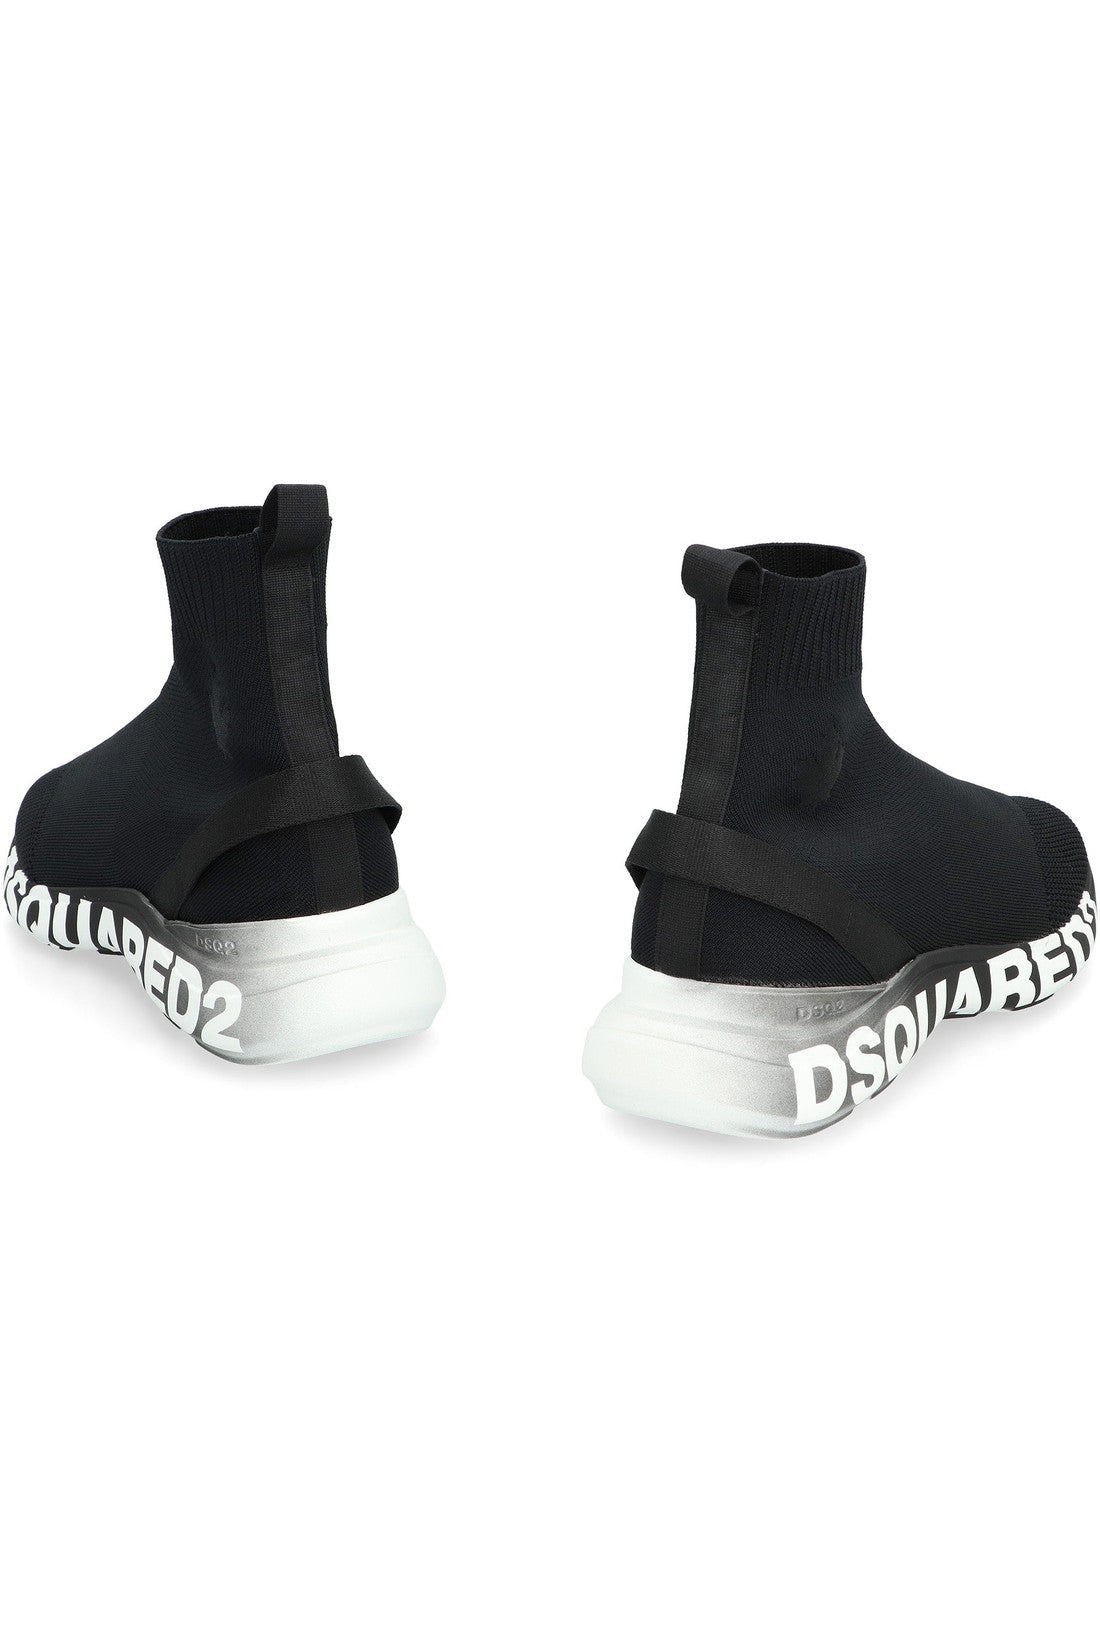 Dsquared2-OUTLET-SALE-Fly knitted sock-style sneakers-ARCHIVIST